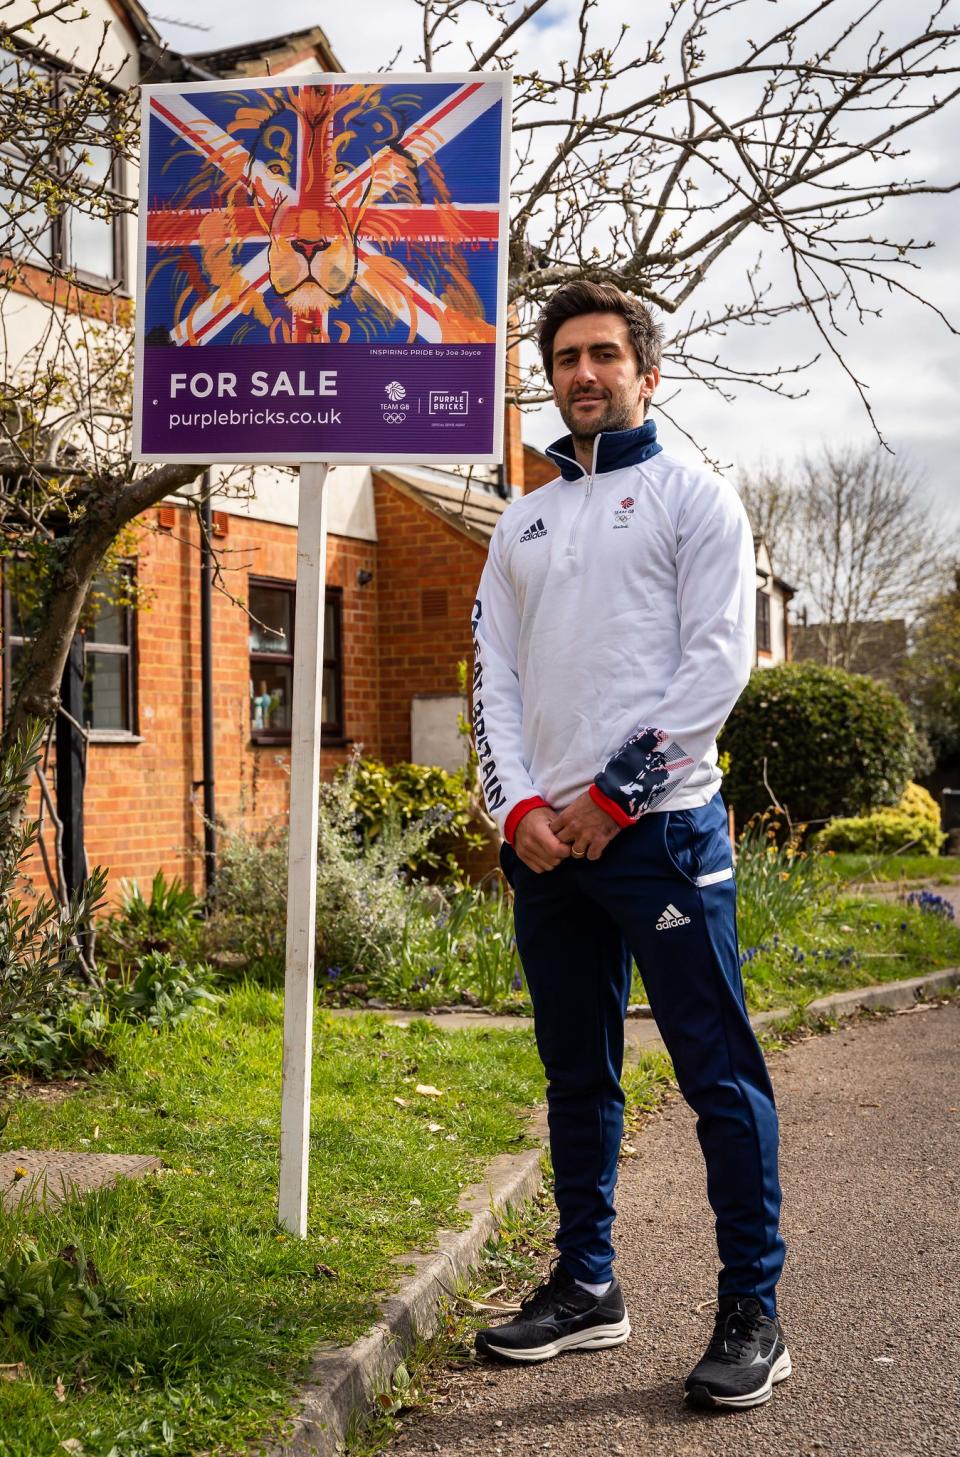 The GB hockey skipper currently has a Purplebricks For Sale board outside his house - with imagery created by GB boxer Joe Joyce